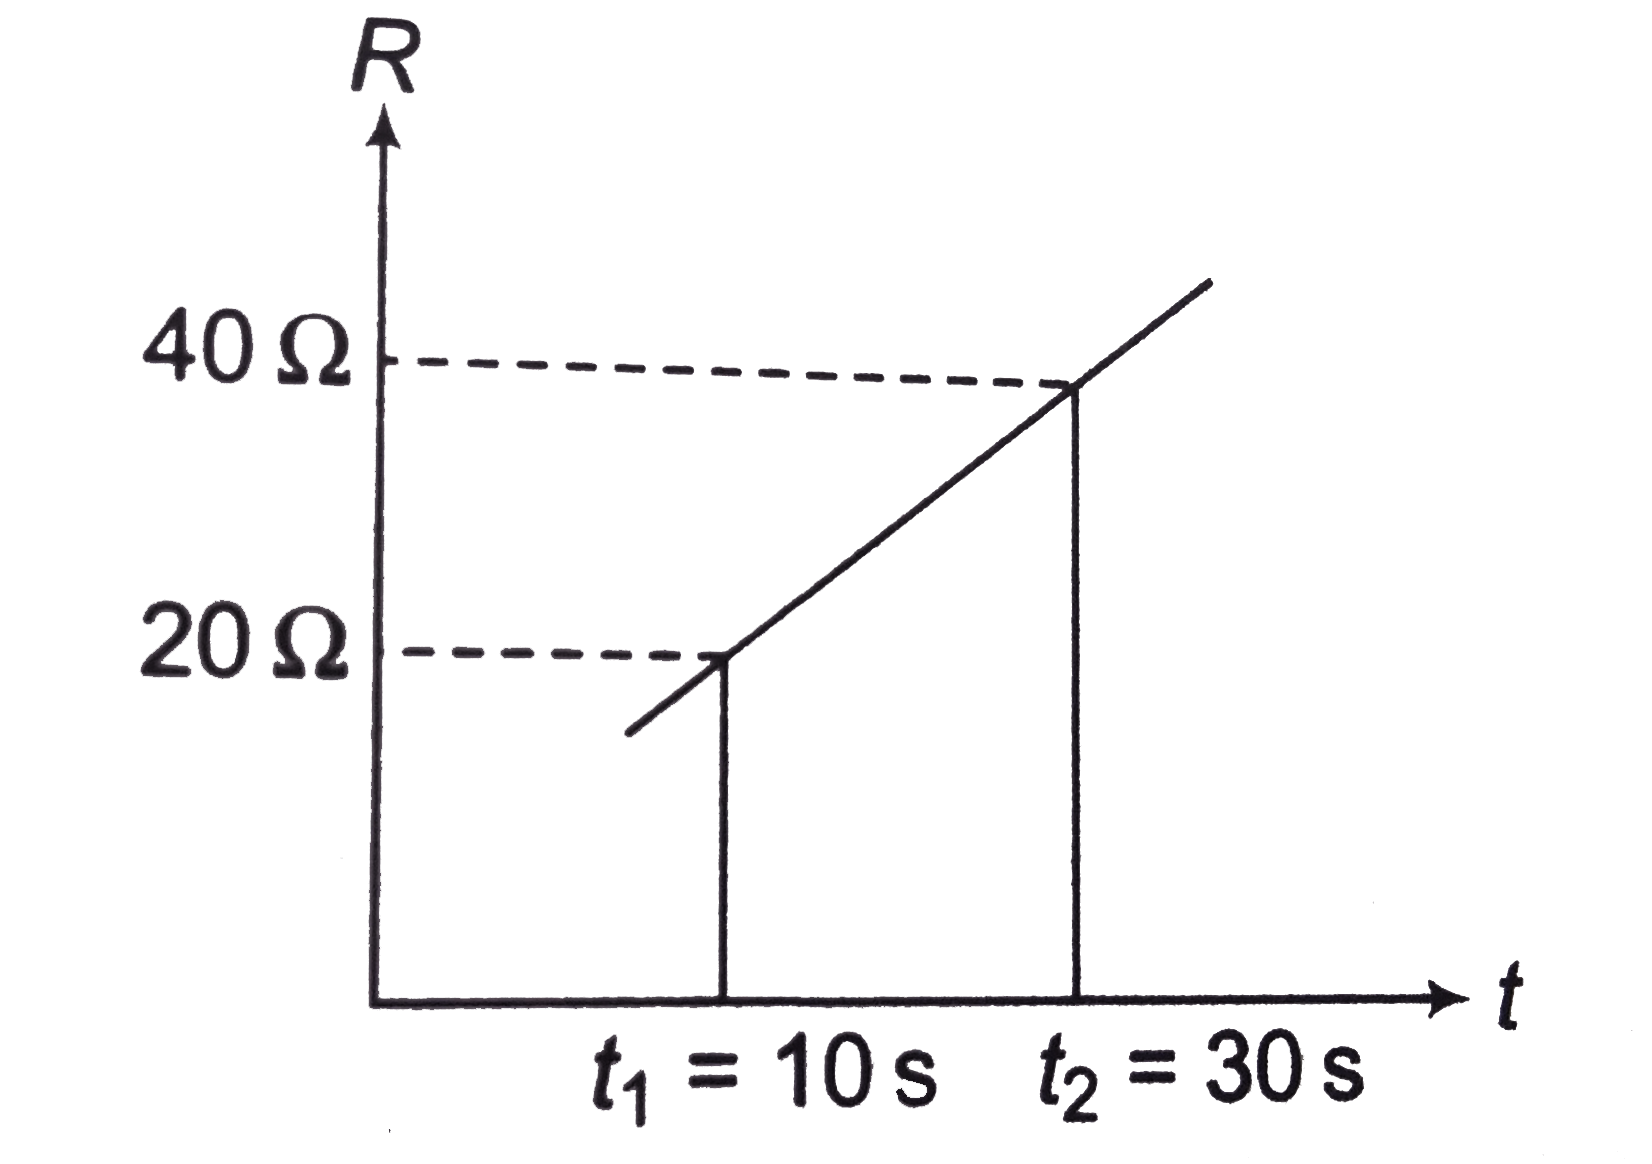 A source of emf E=10 V and having negligible internal resistance is connected to a variable resistance.The resistance varies as shown in figure. The total charge that has passed through the resistor R during the time interval from t1 or t2 is